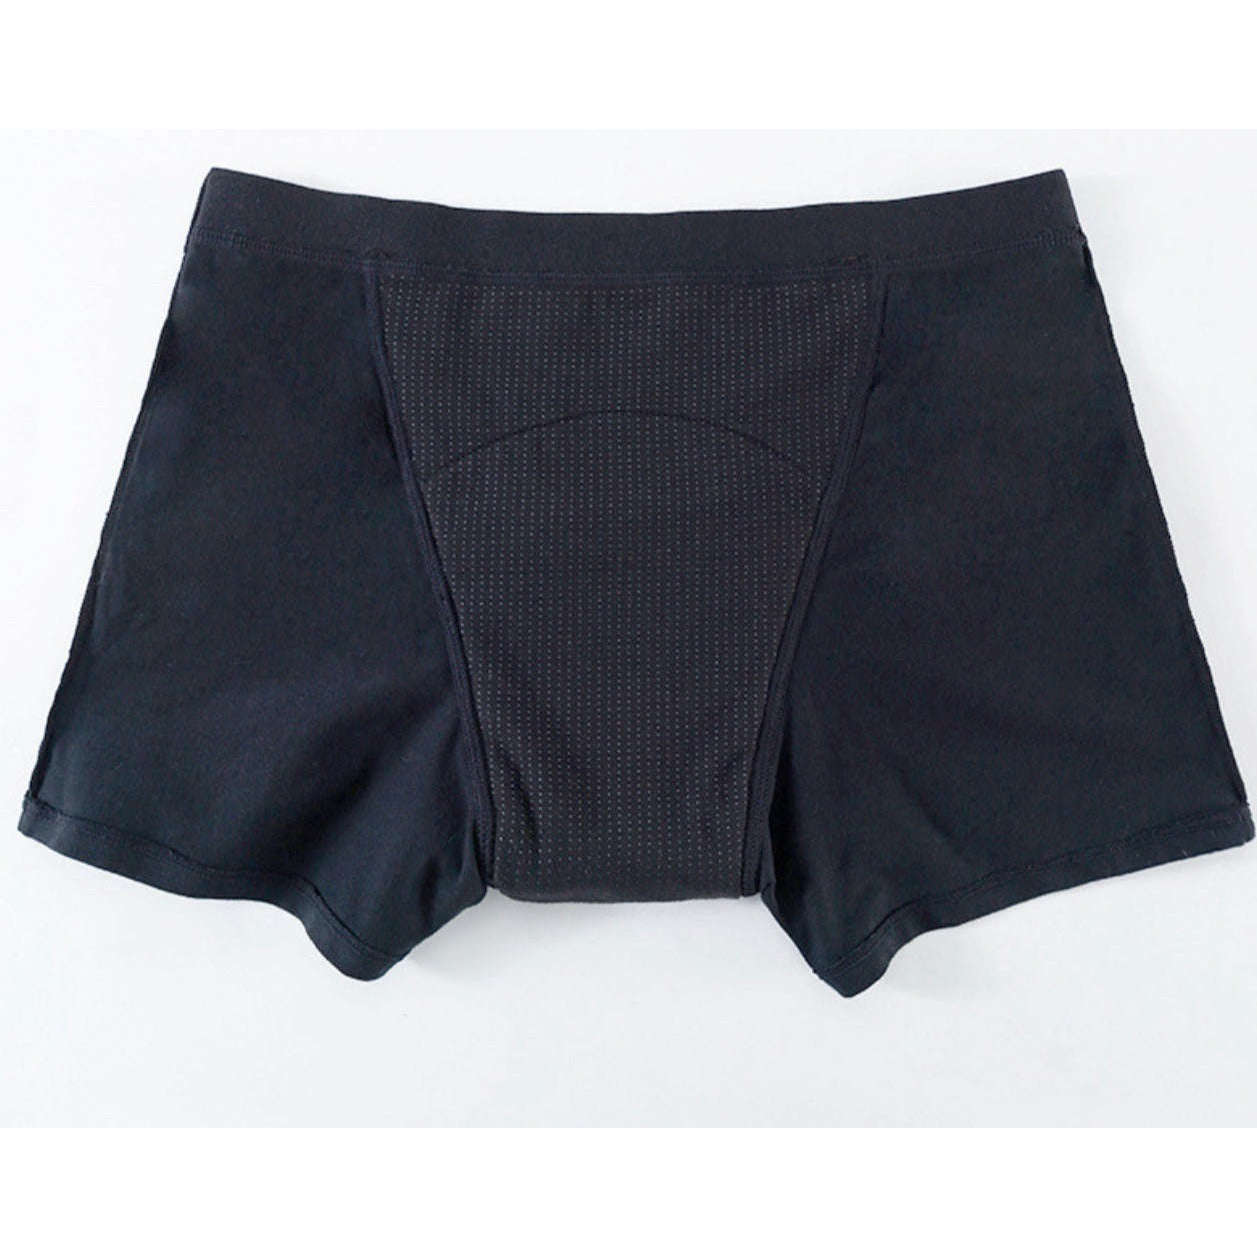 Teen Period Sleep Short soft, comfortable, reliable for young